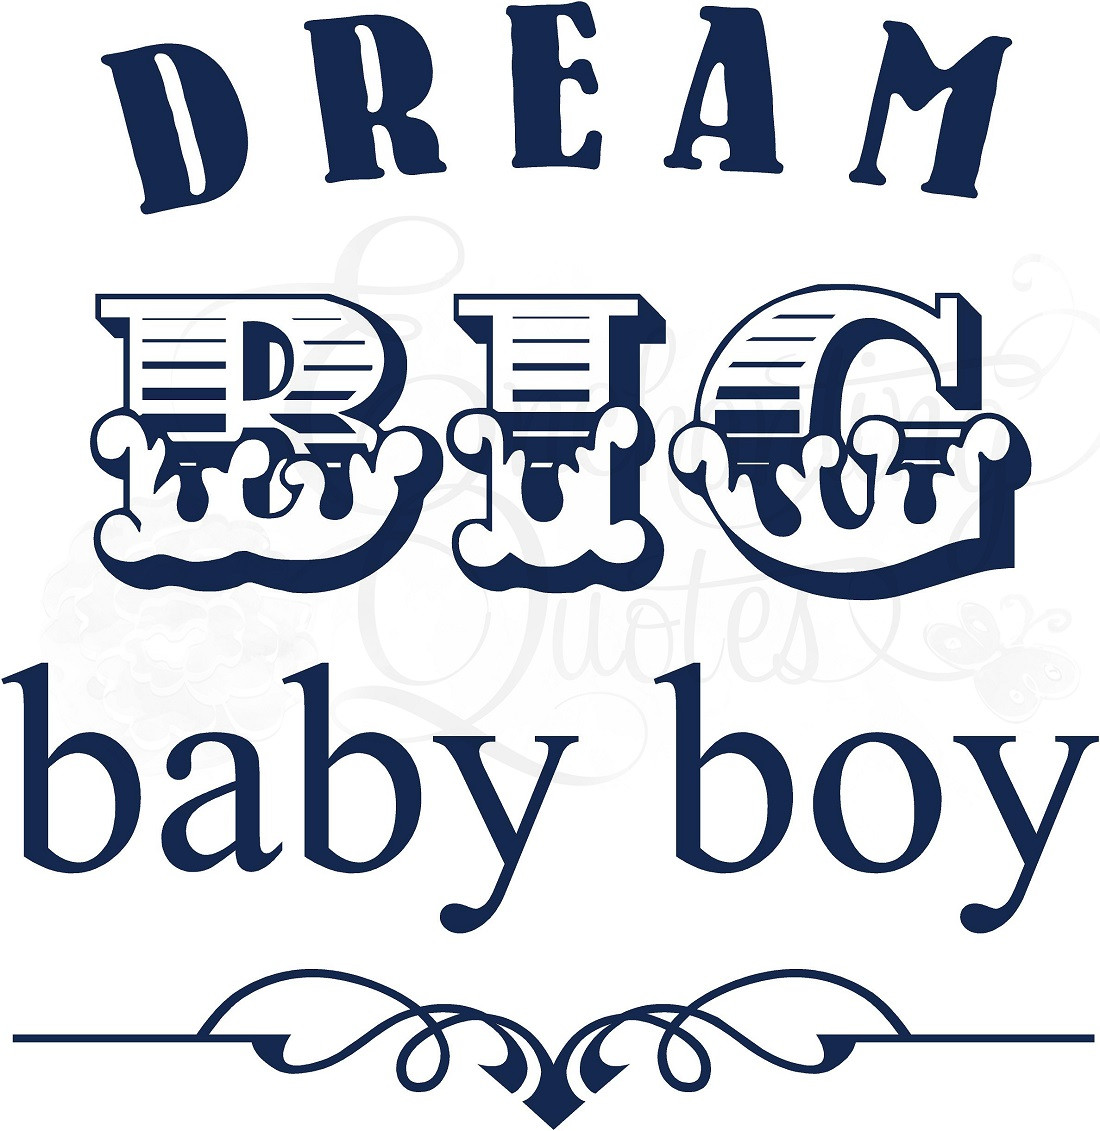 Quotes On Baby Boys
 Baby Boy Quotes And Sayings QuotesGram